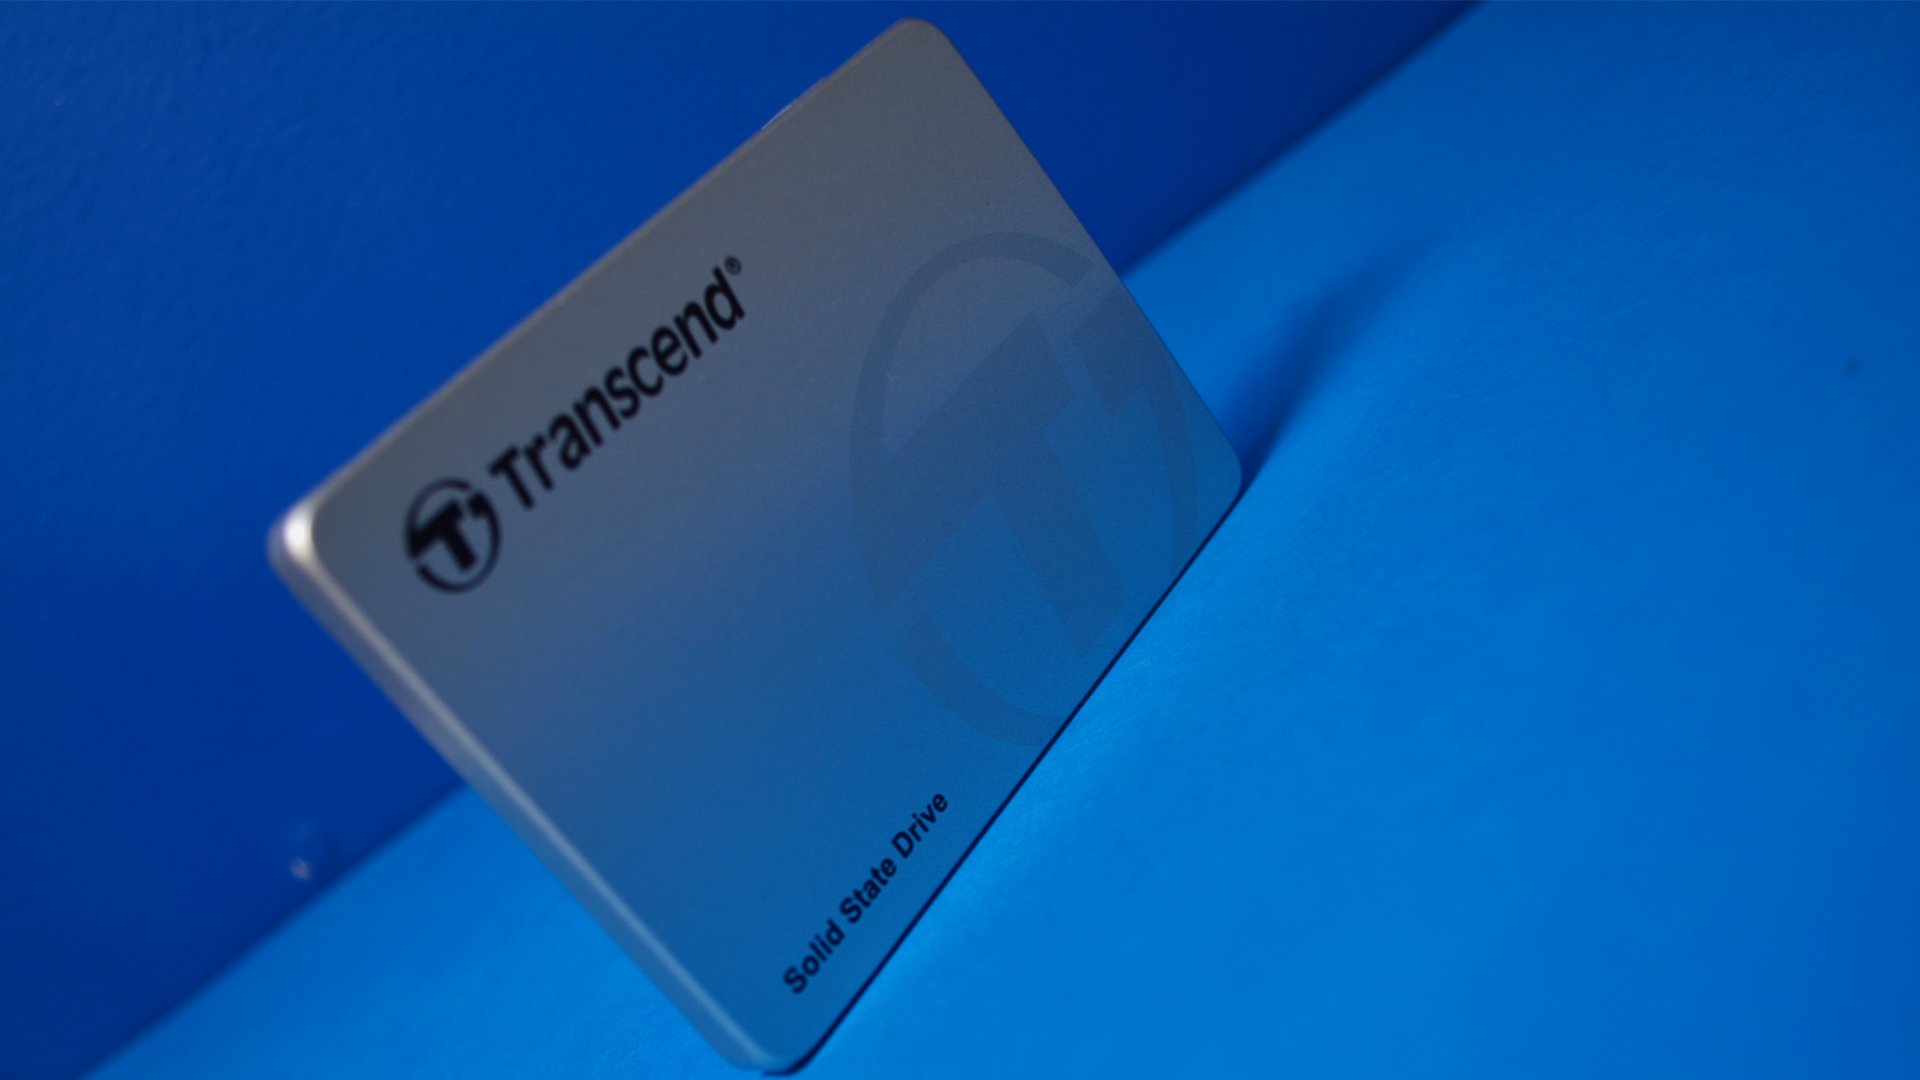 Transcend 370s 64GB SSD Review 9